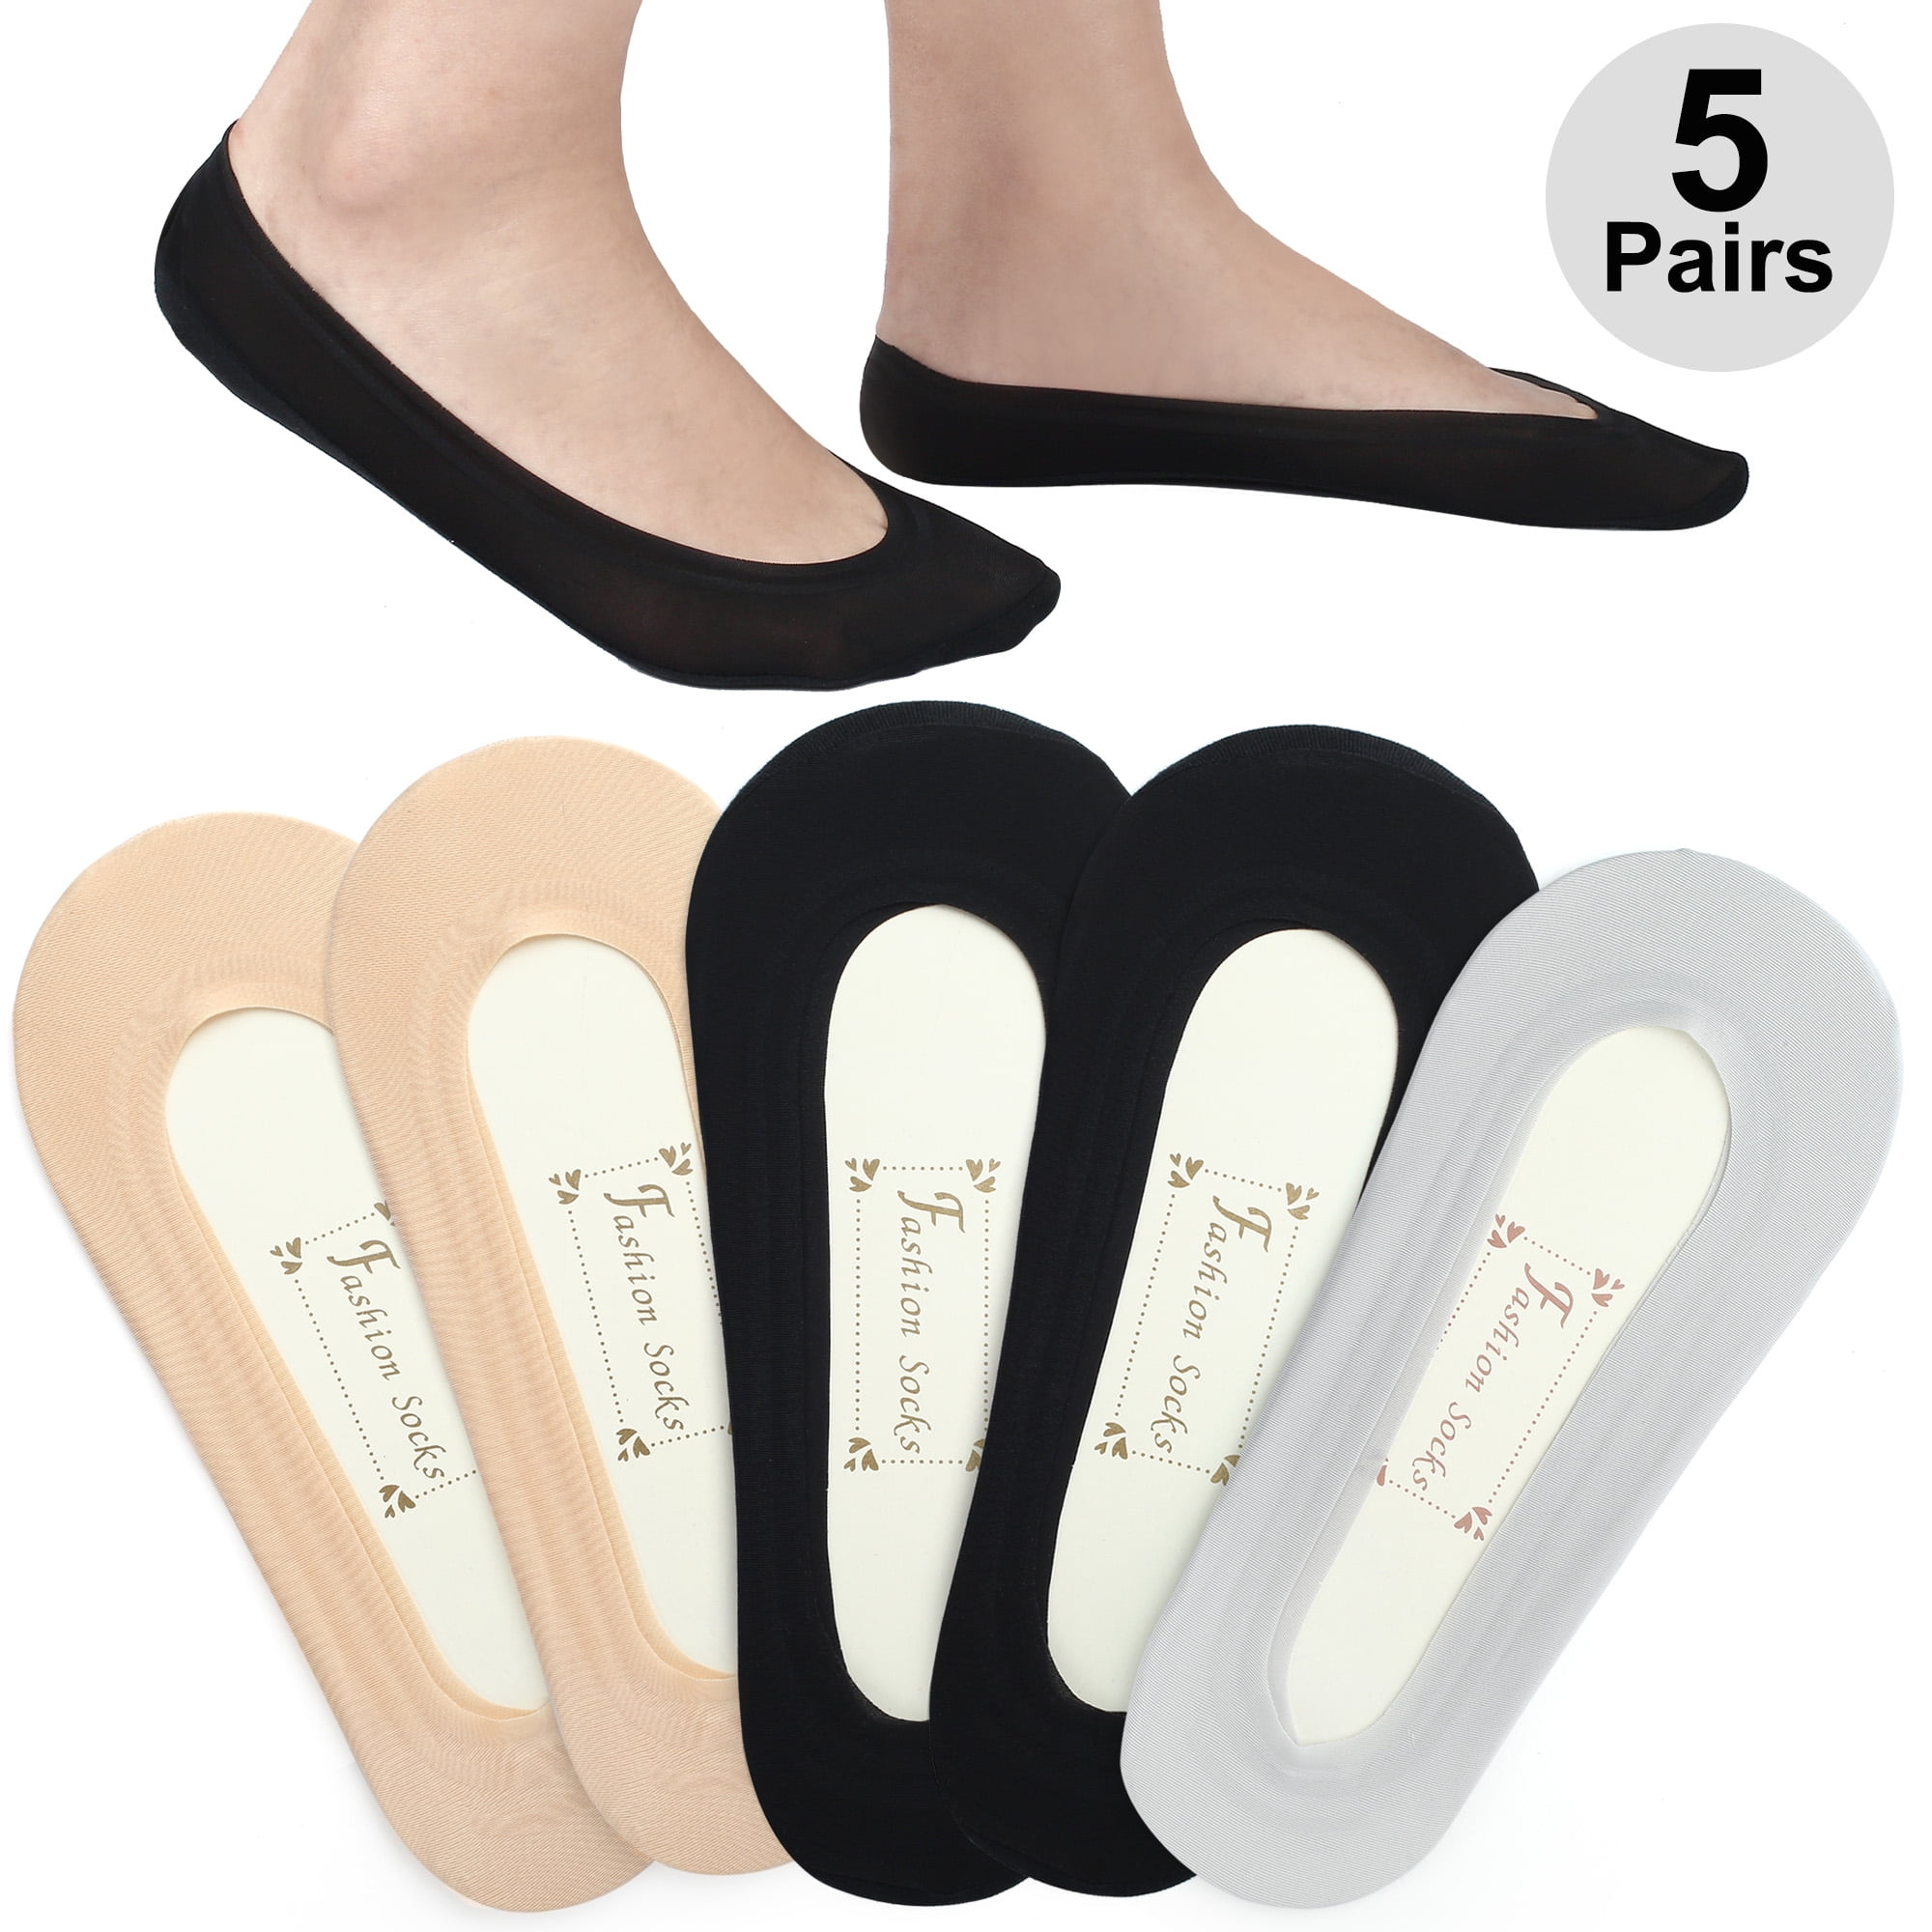 New boat socks Anti-slip Silicone Lace Invisible No Show Low Cut Liner For Women